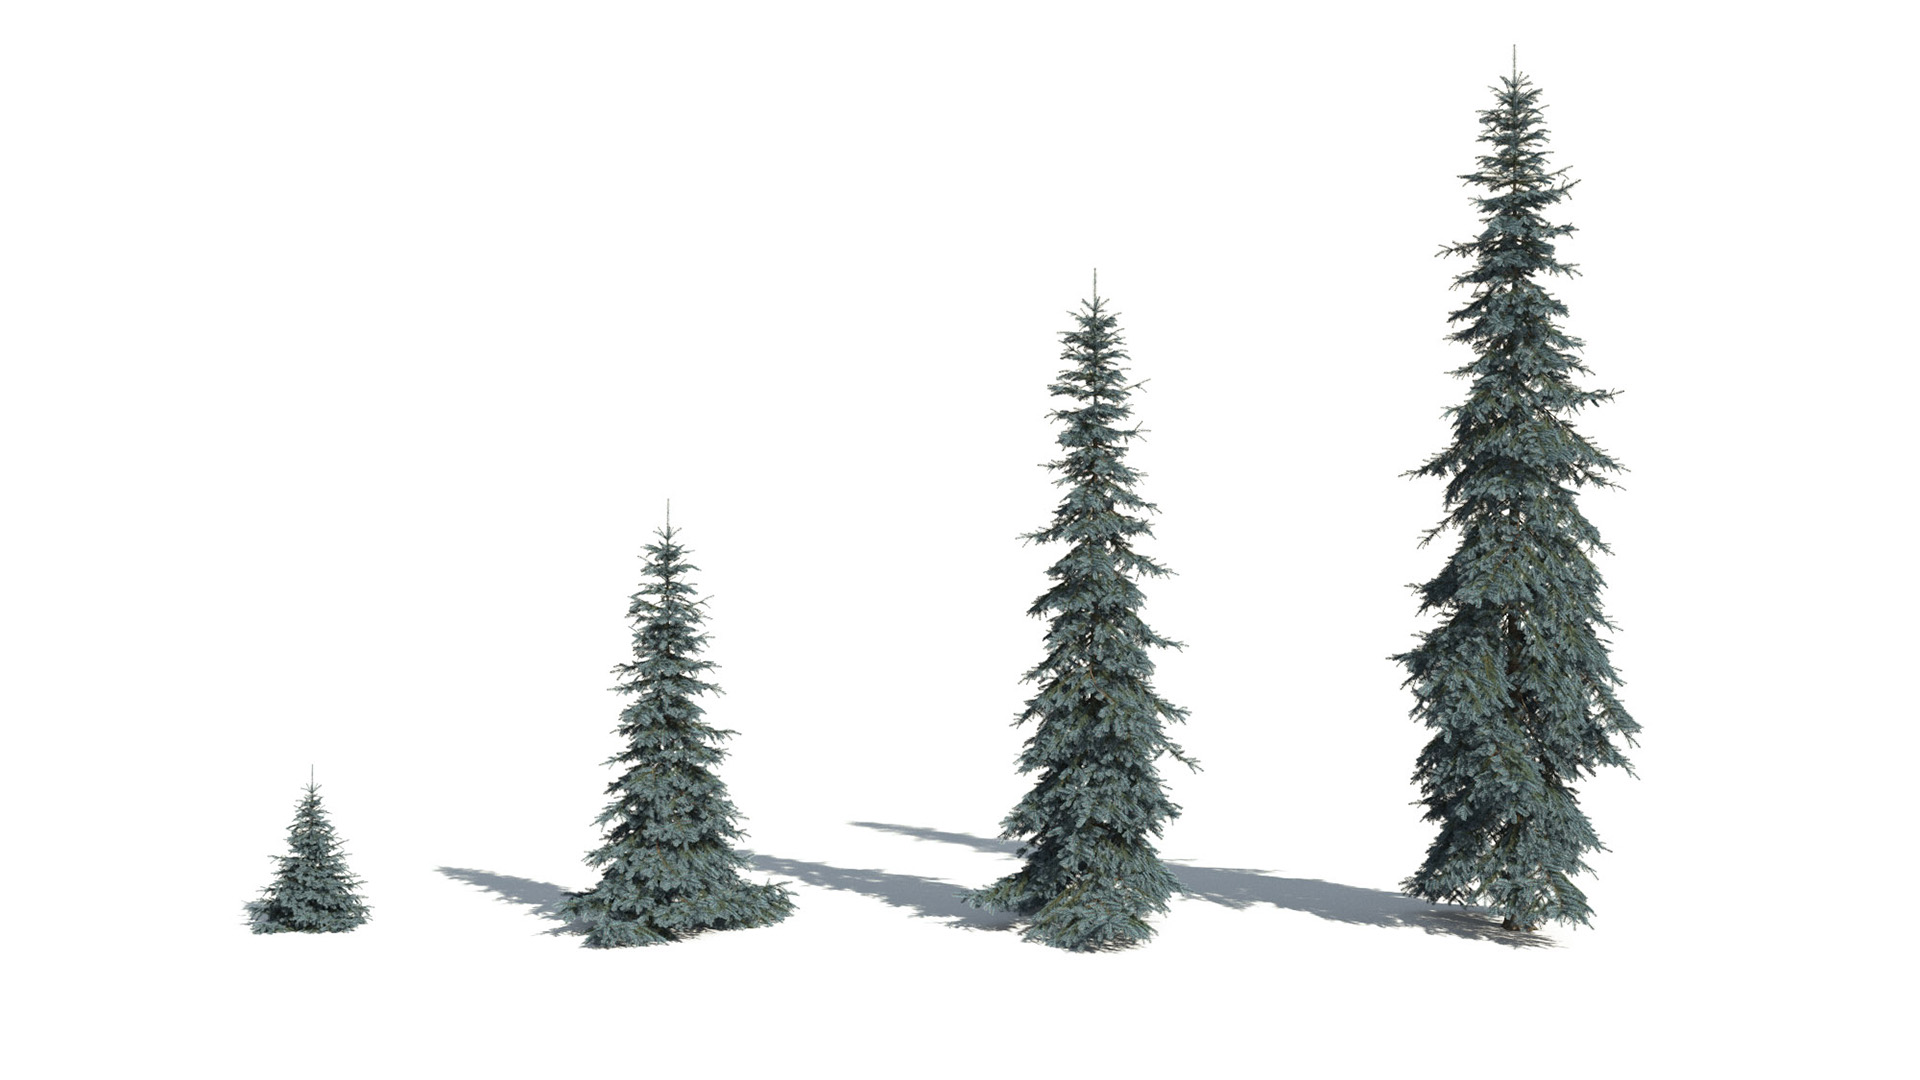 3D model of the Colorado Blue spruce Koster Picea pungens 'Koster' maturity variations